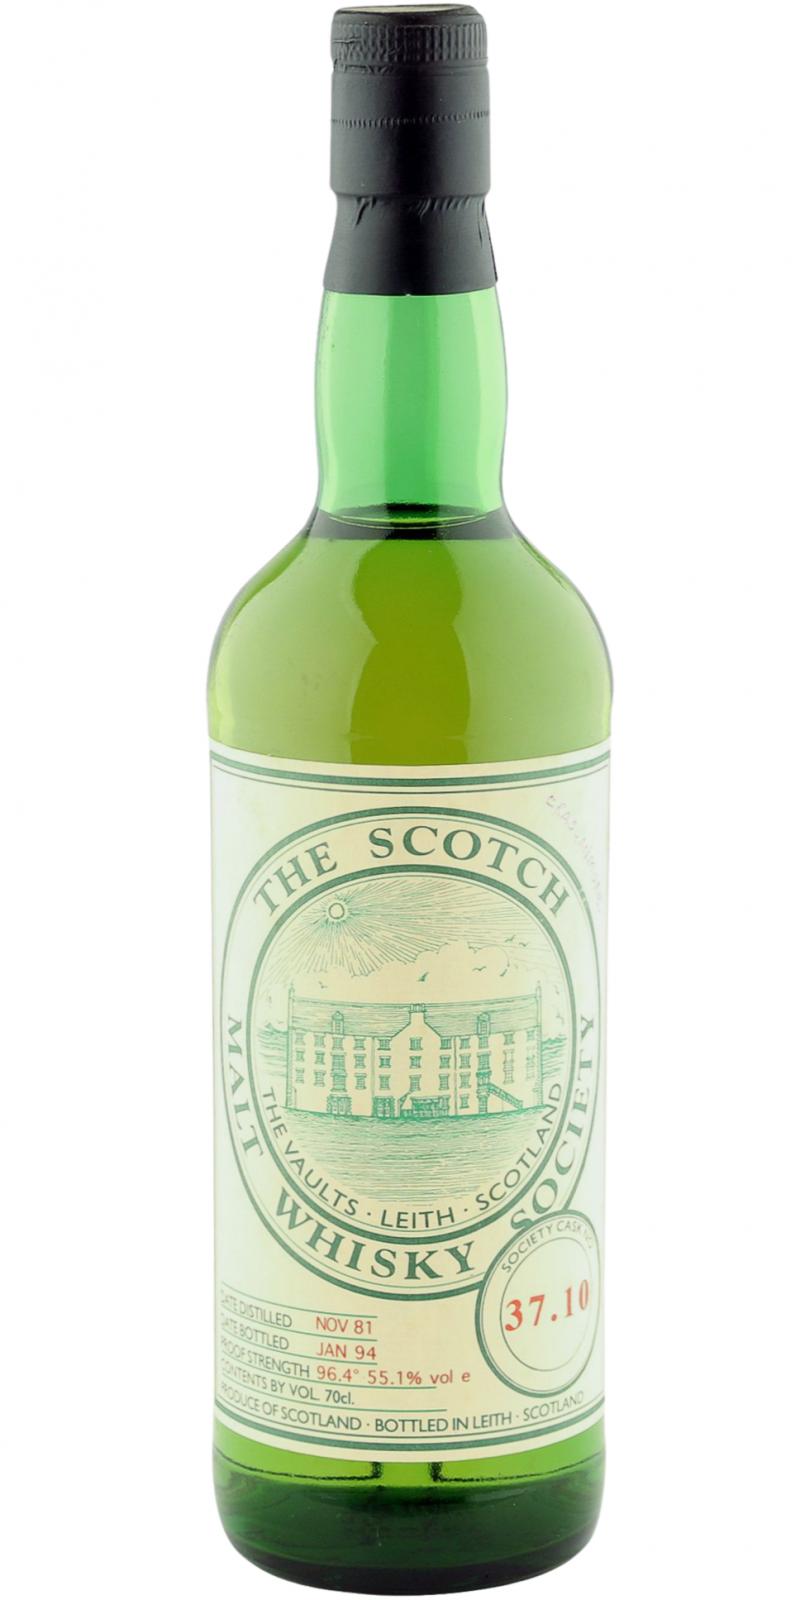 Cragganmore 1981 SMWS 37.10 55.1% 700ml